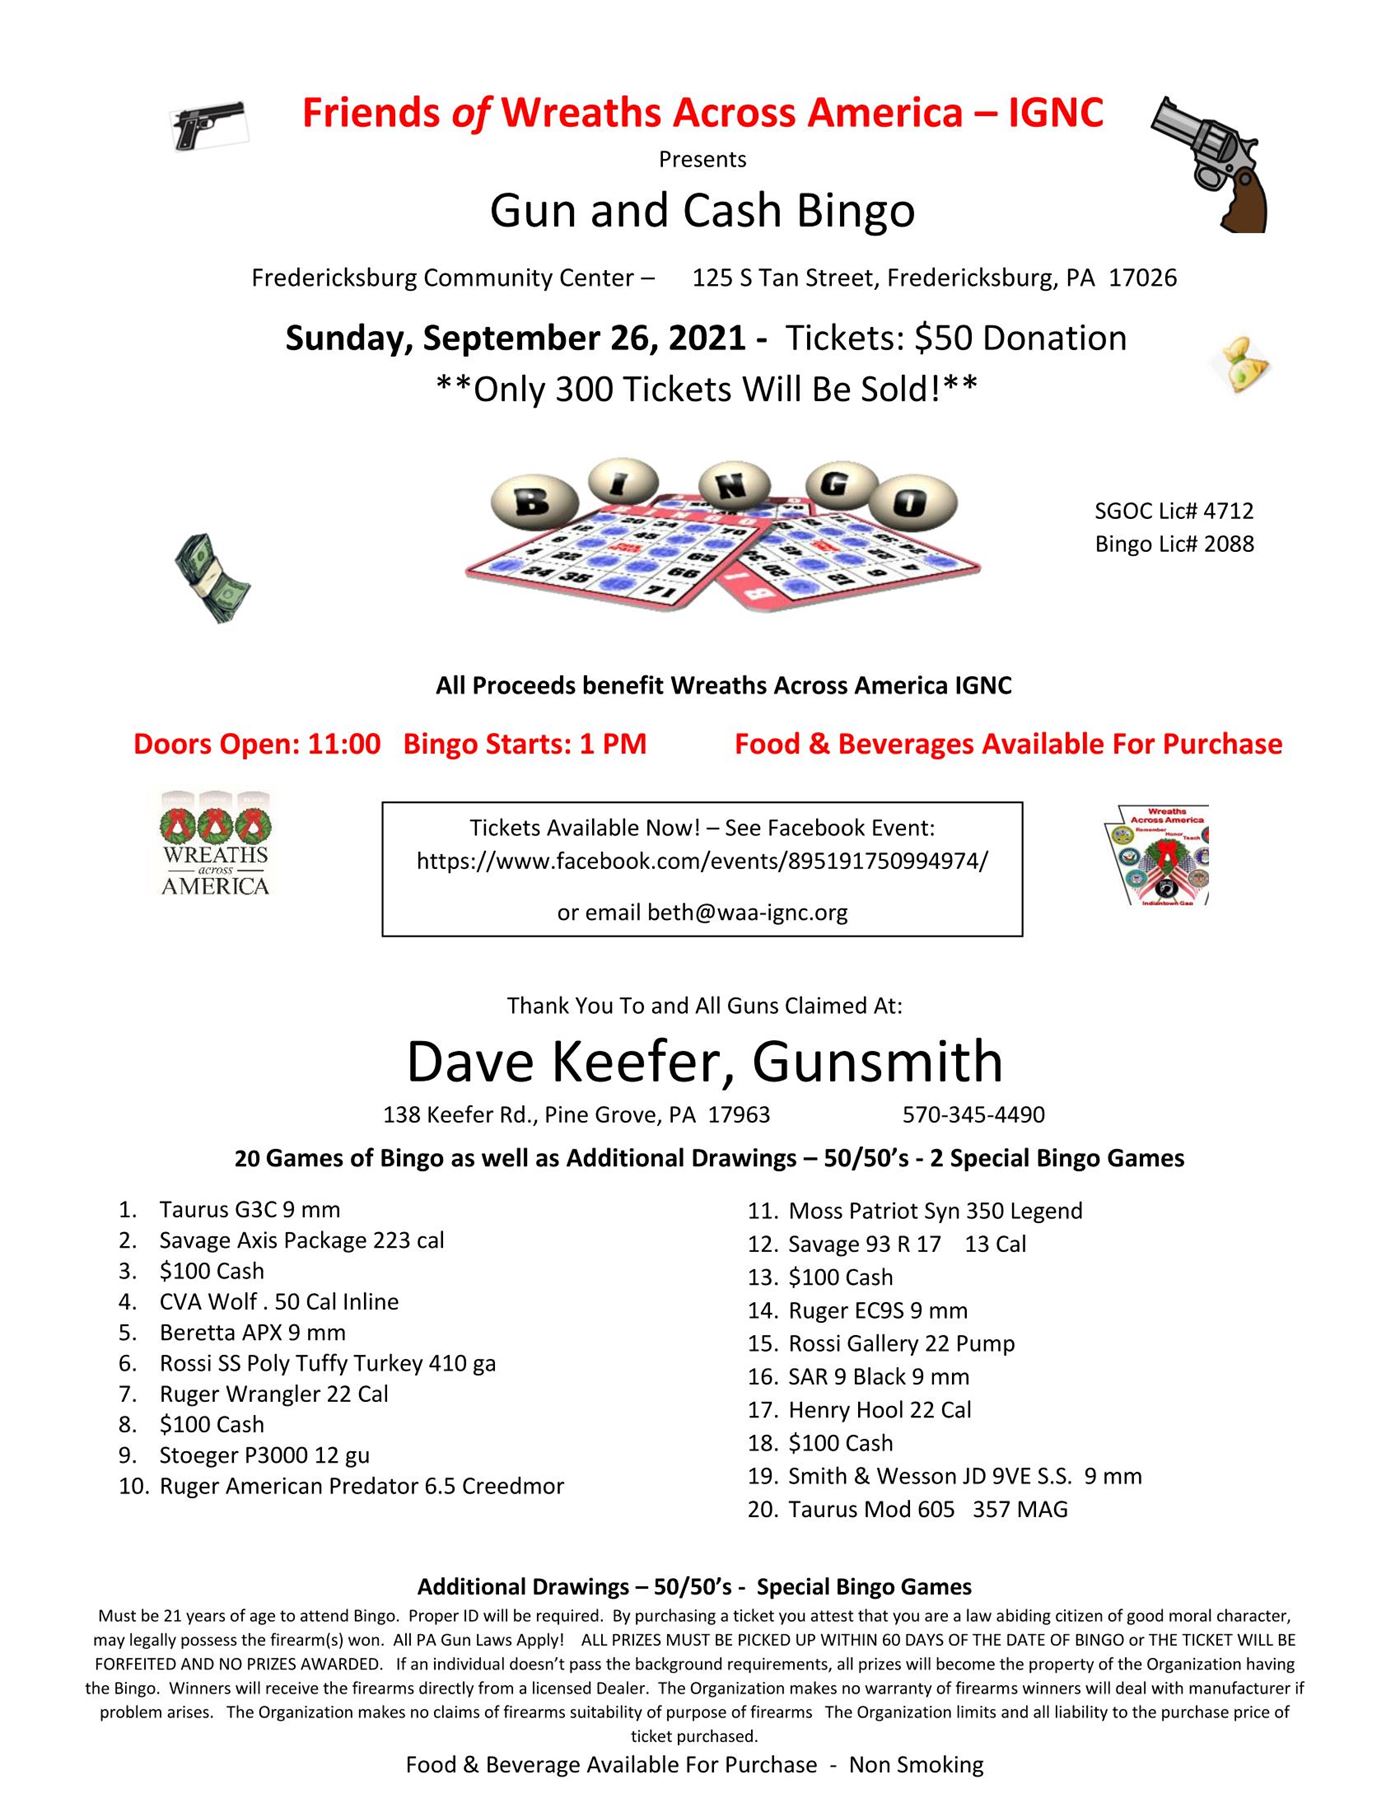 Join us for some fun - 20 Games of Bingo for guns or cash.
Must be 21 to enter the building and play.
Food and beverages available.
Fredericksburg Community Center.
Tickets - email info@waa-ignc.org